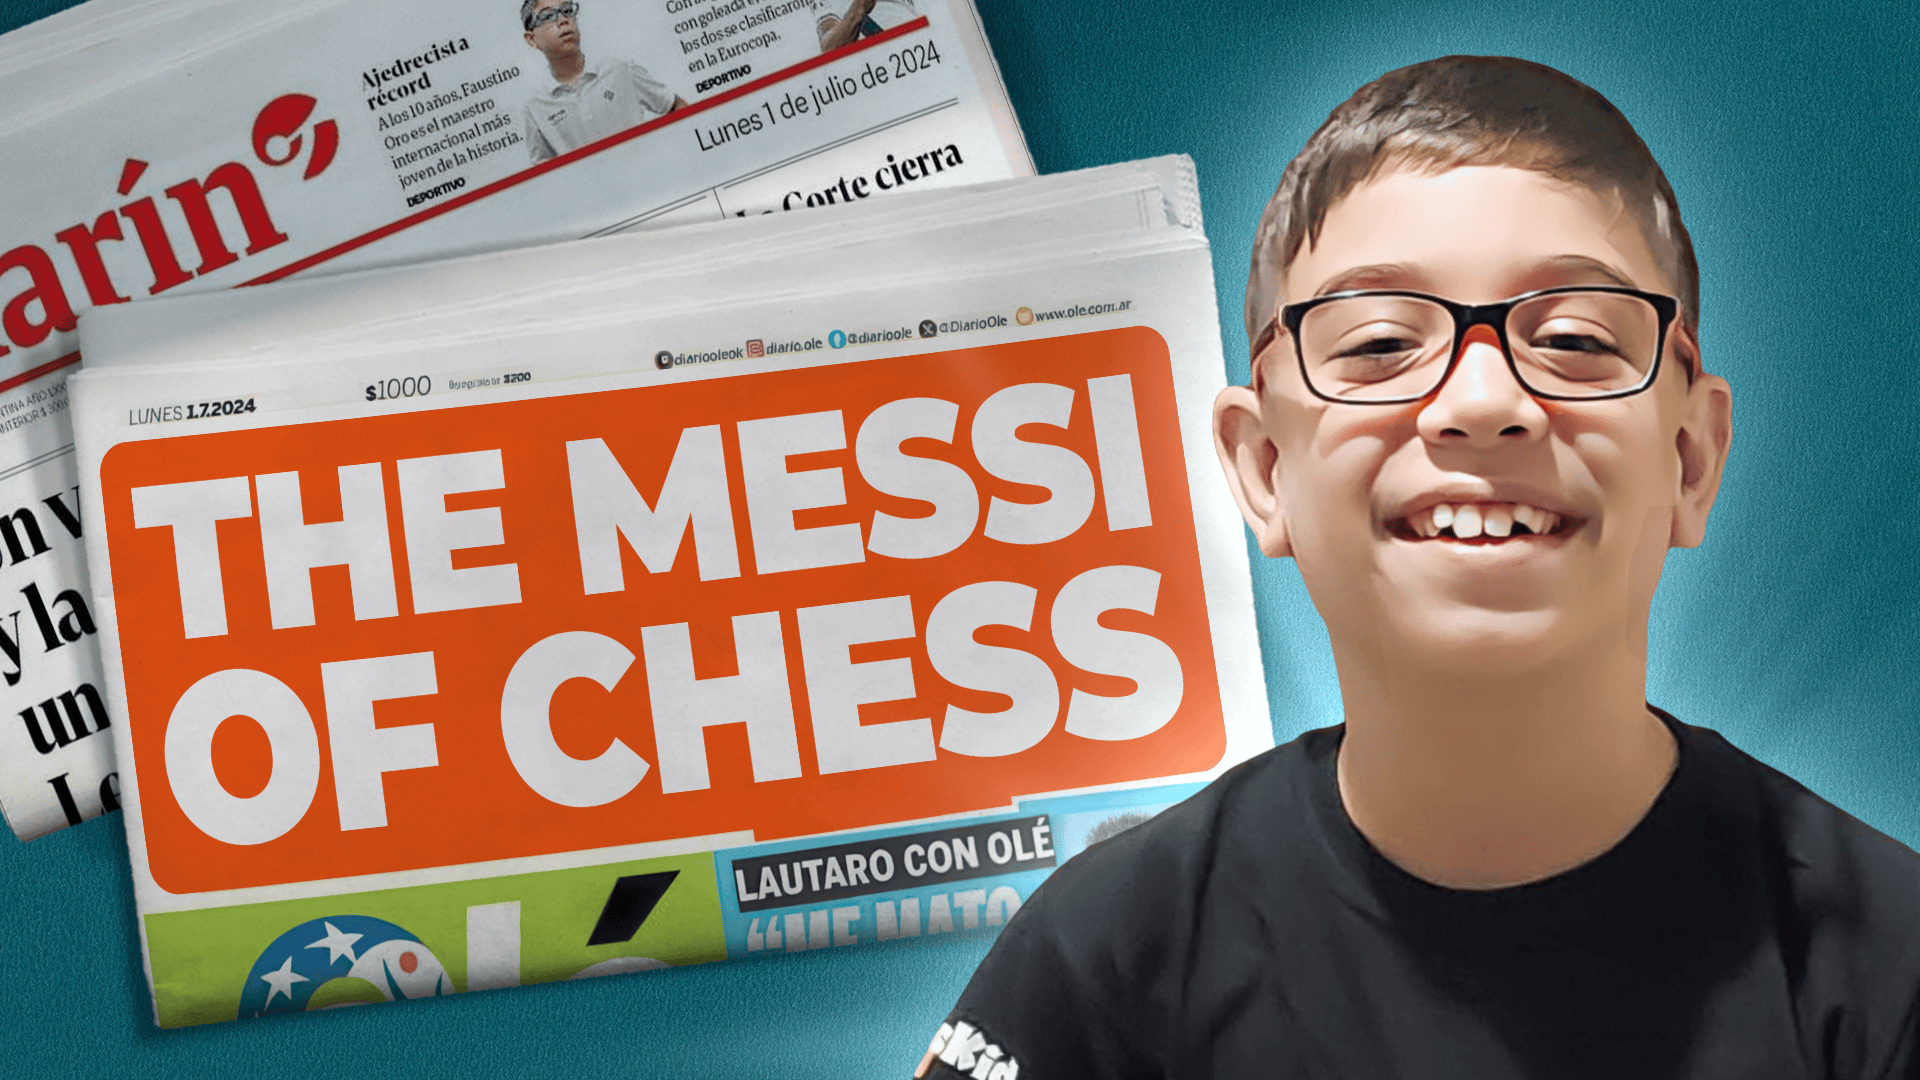 How the Messi of Chess Is Creating Faustimania In Argentina